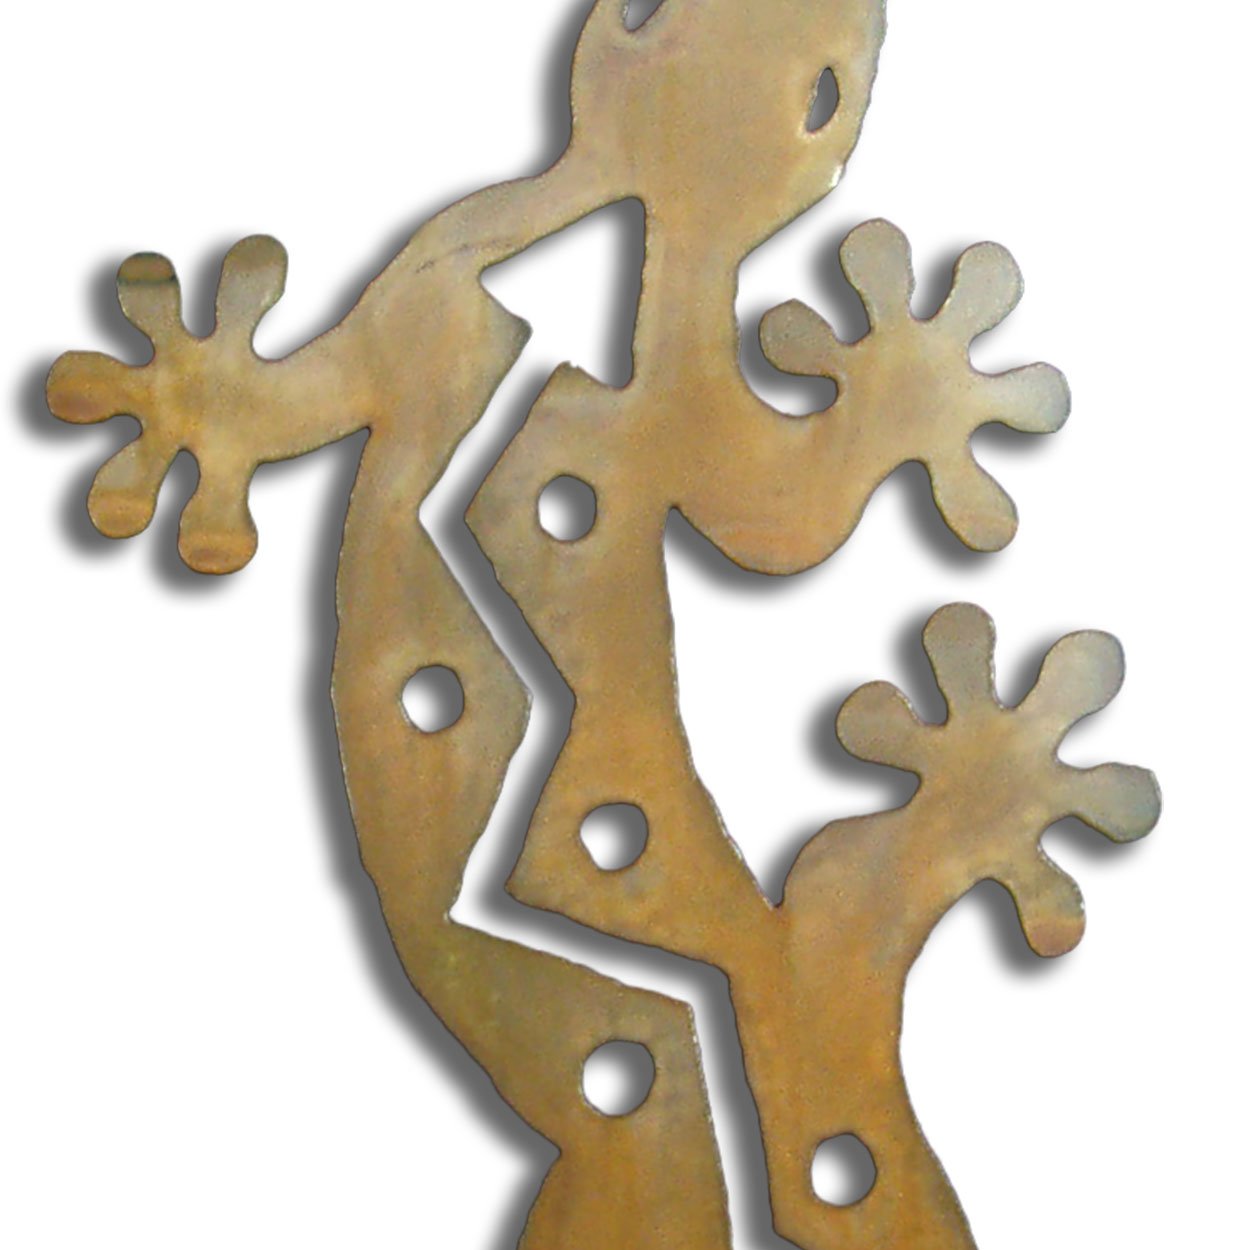 165181 - 12-inch small S-Shaped Gecko 3D Metal Wall Art in a rich rust finish